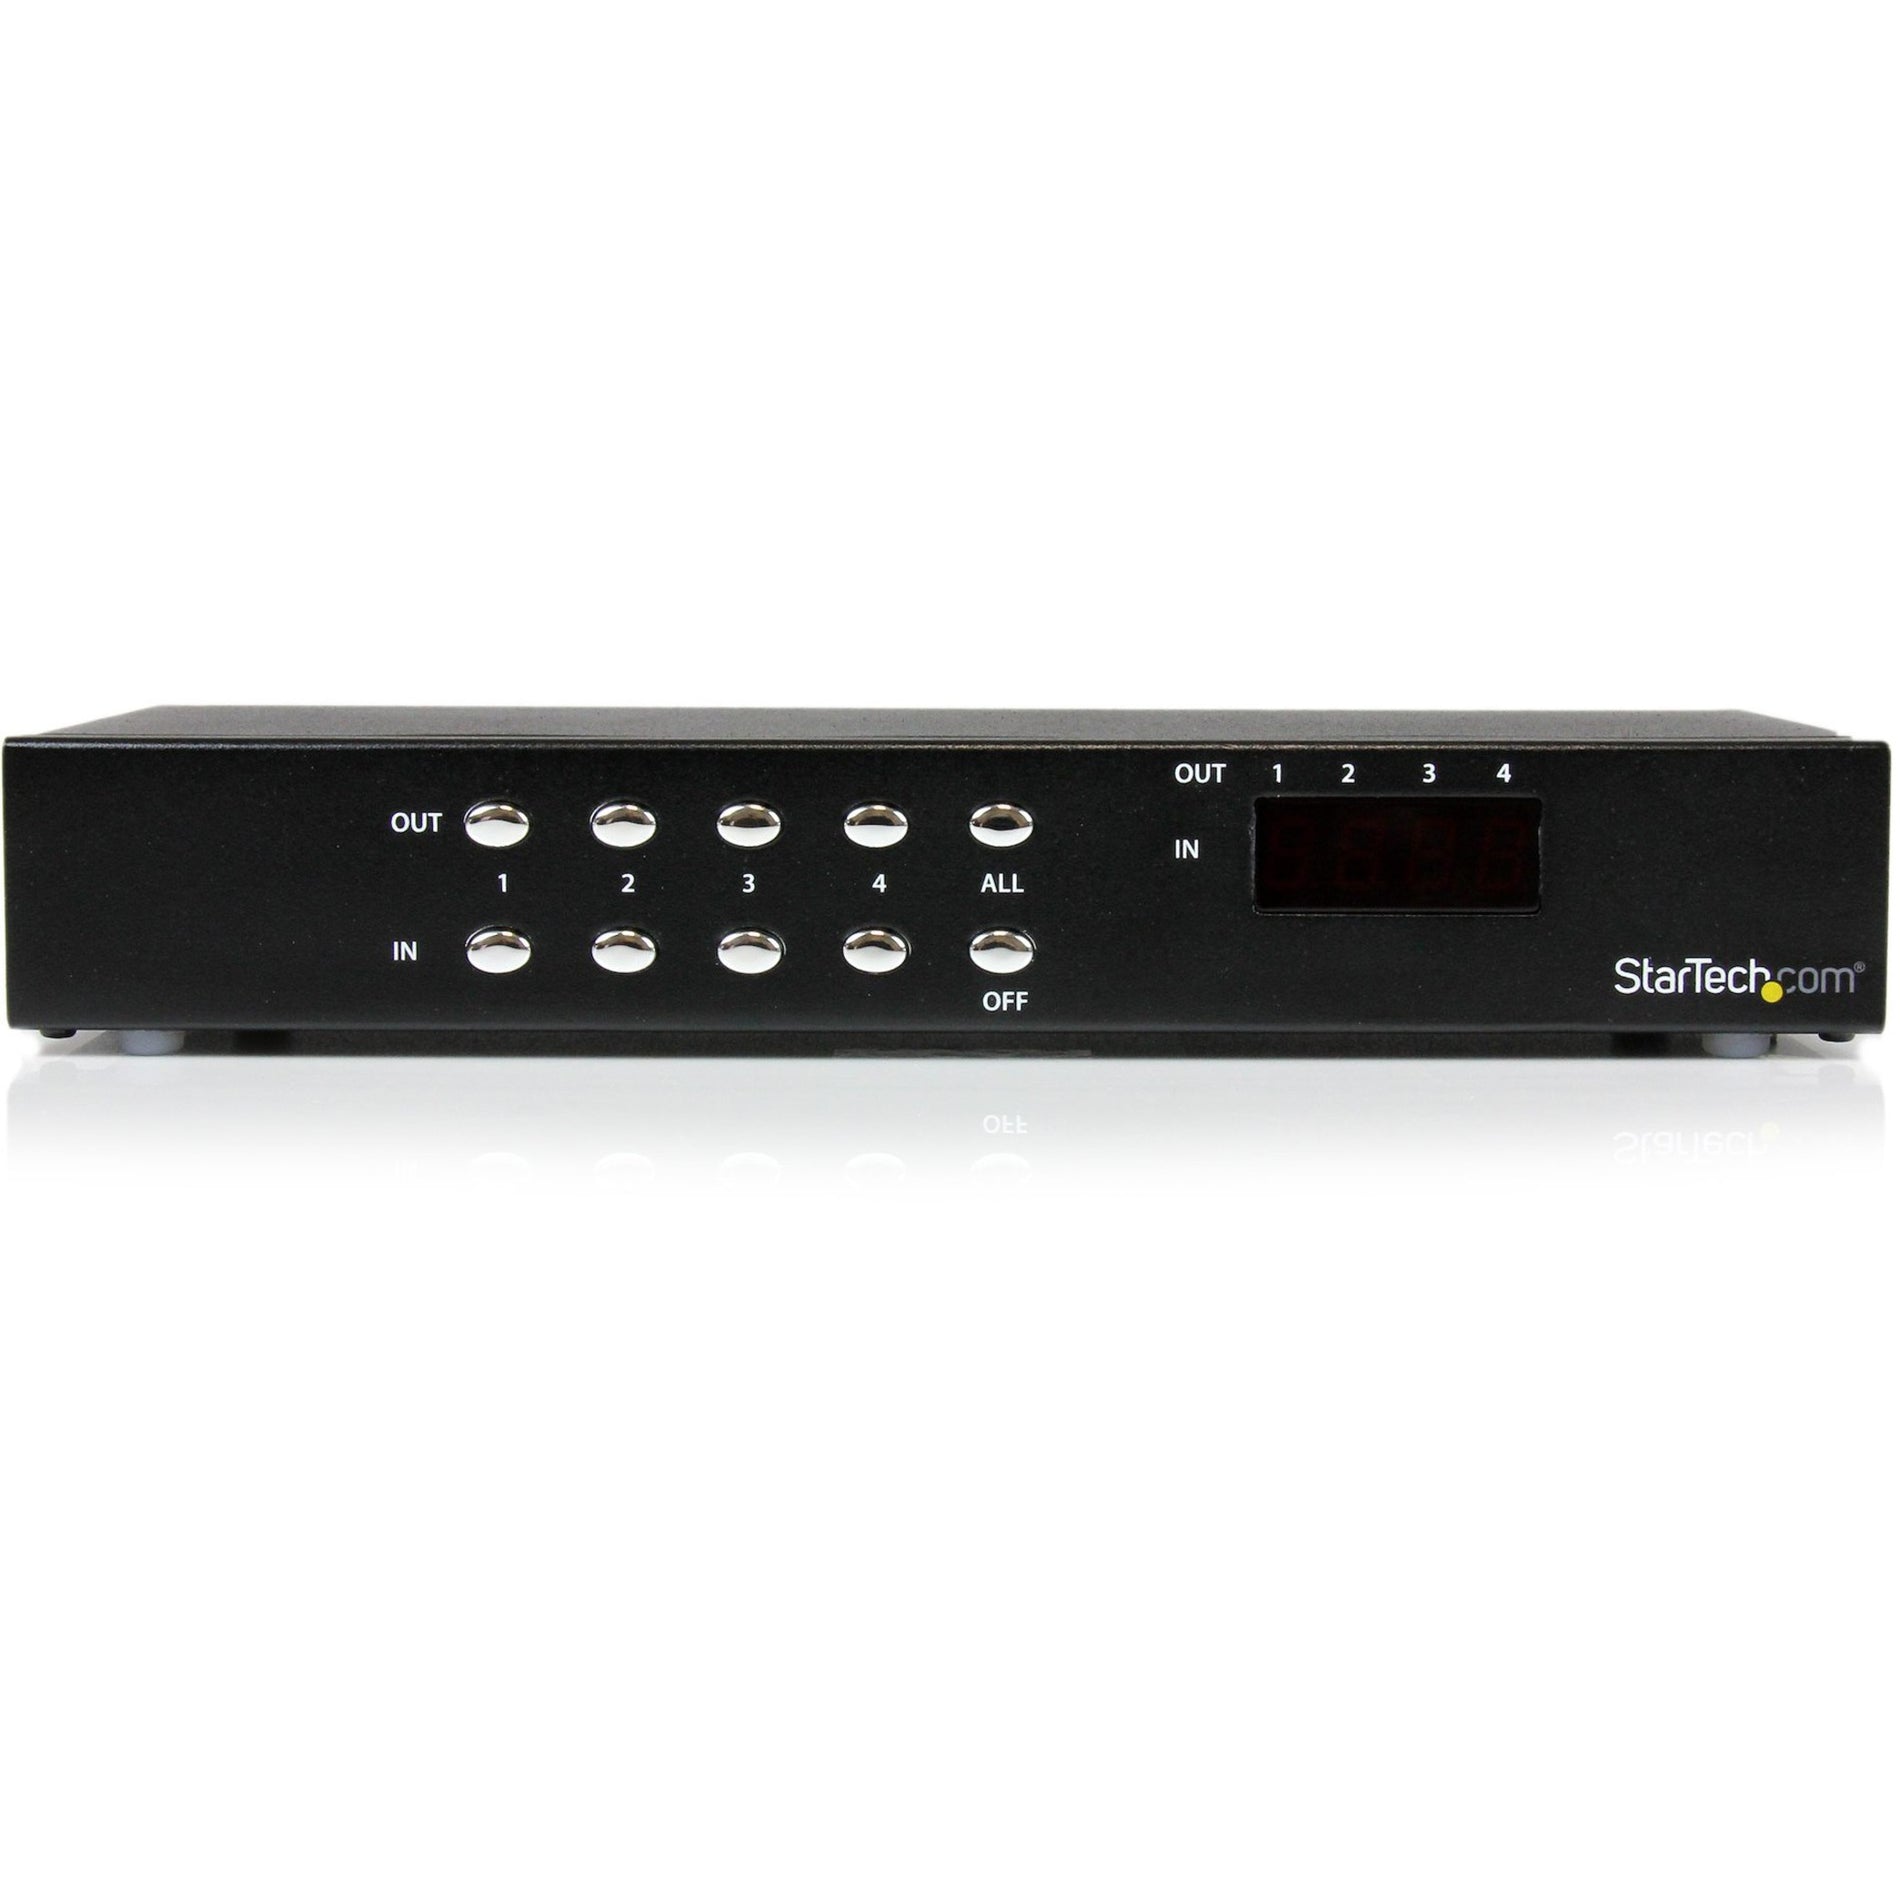 StarTech.com ST424MX 4x4 VGA Video Matrix Switch Splitter with Audio, Full Control, Extended Connection